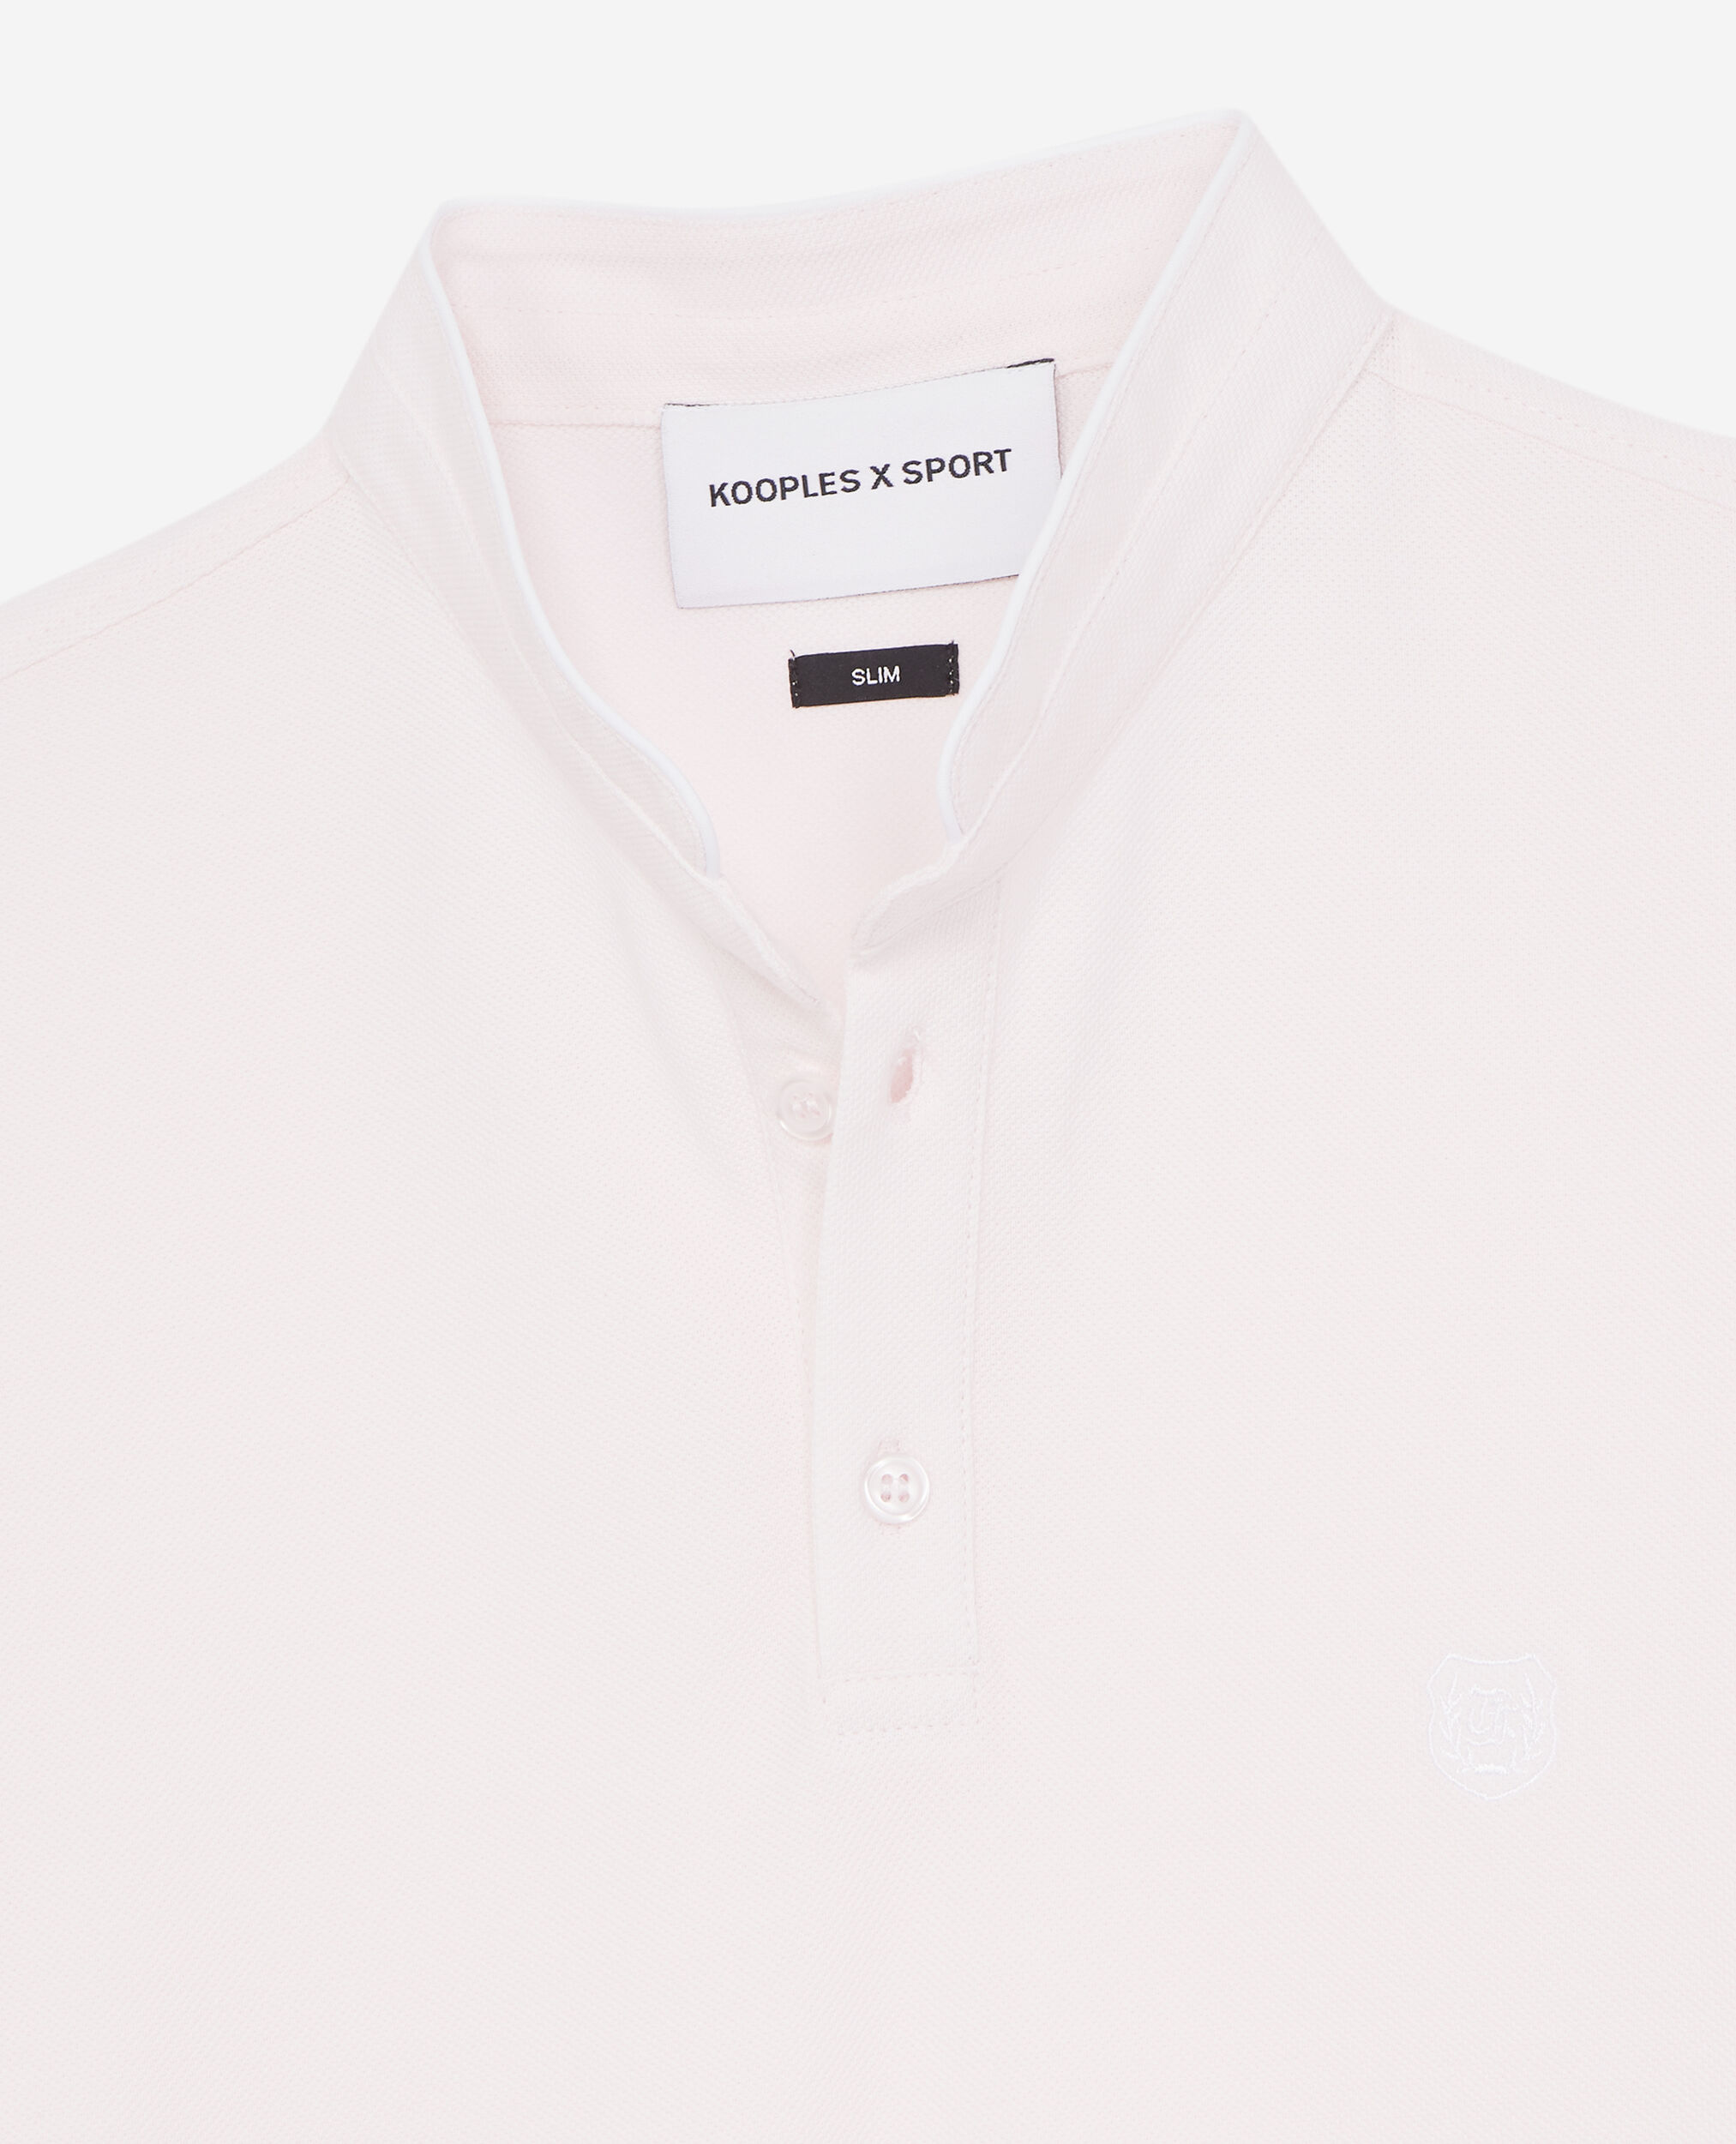 Poloshirt hellrosa Wappen weiß, BABY PINK/BLANC OPTIQUE, hi-res image number null